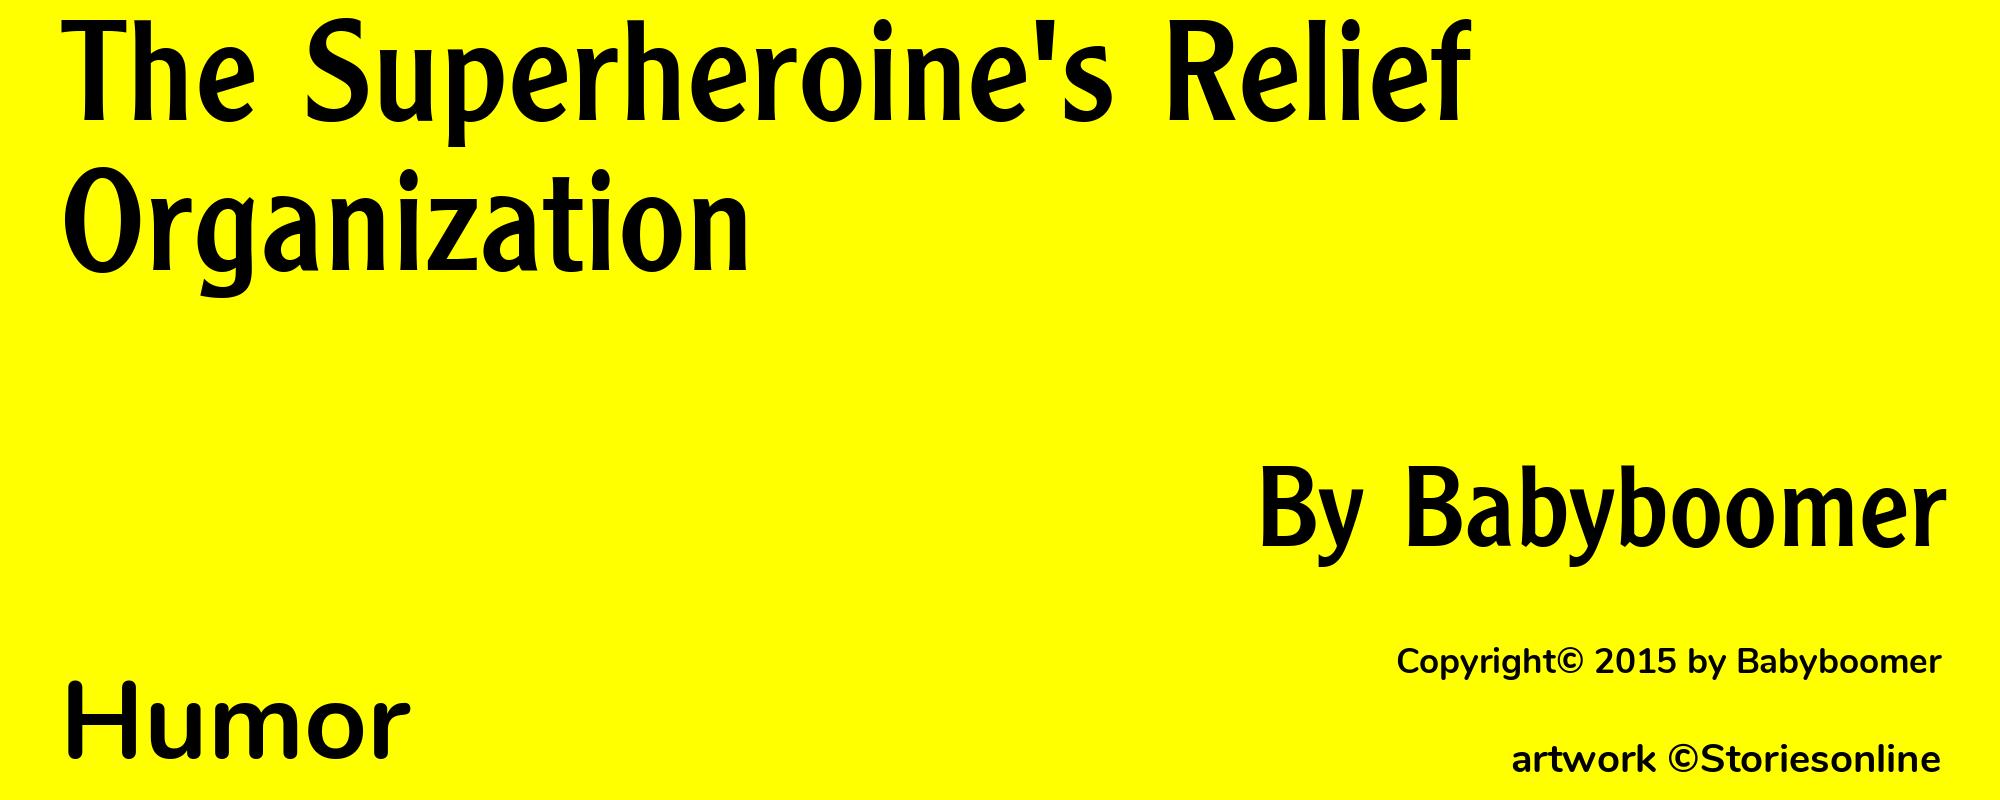 The Superheroine's Relief Organization - Cover